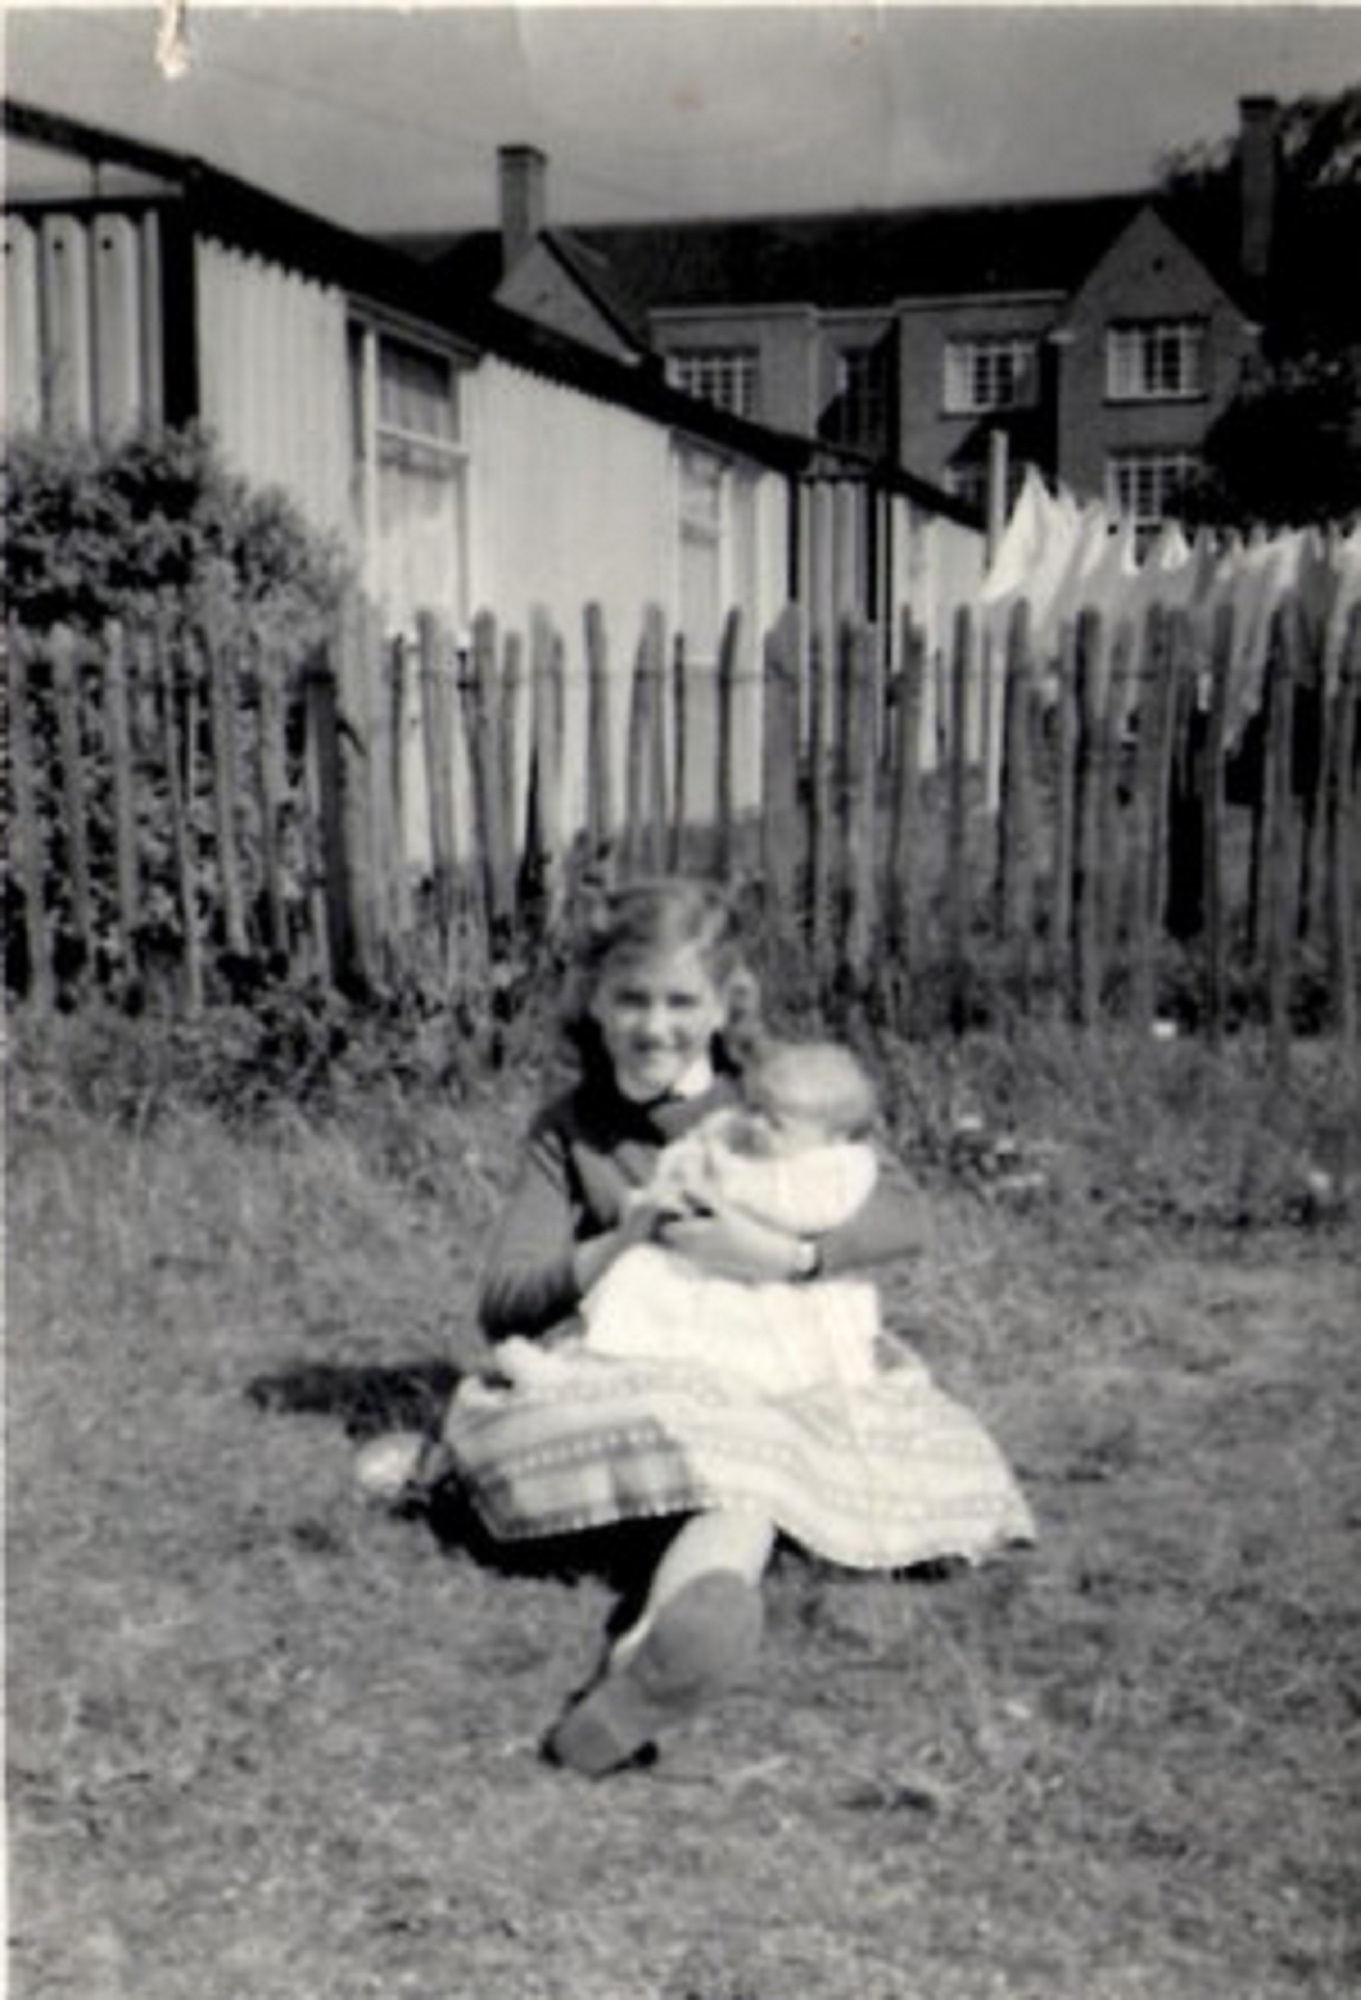 Jeanette Anderson and Denise Anderson. Hollyhedge bungalows, Blackheath, London SE3